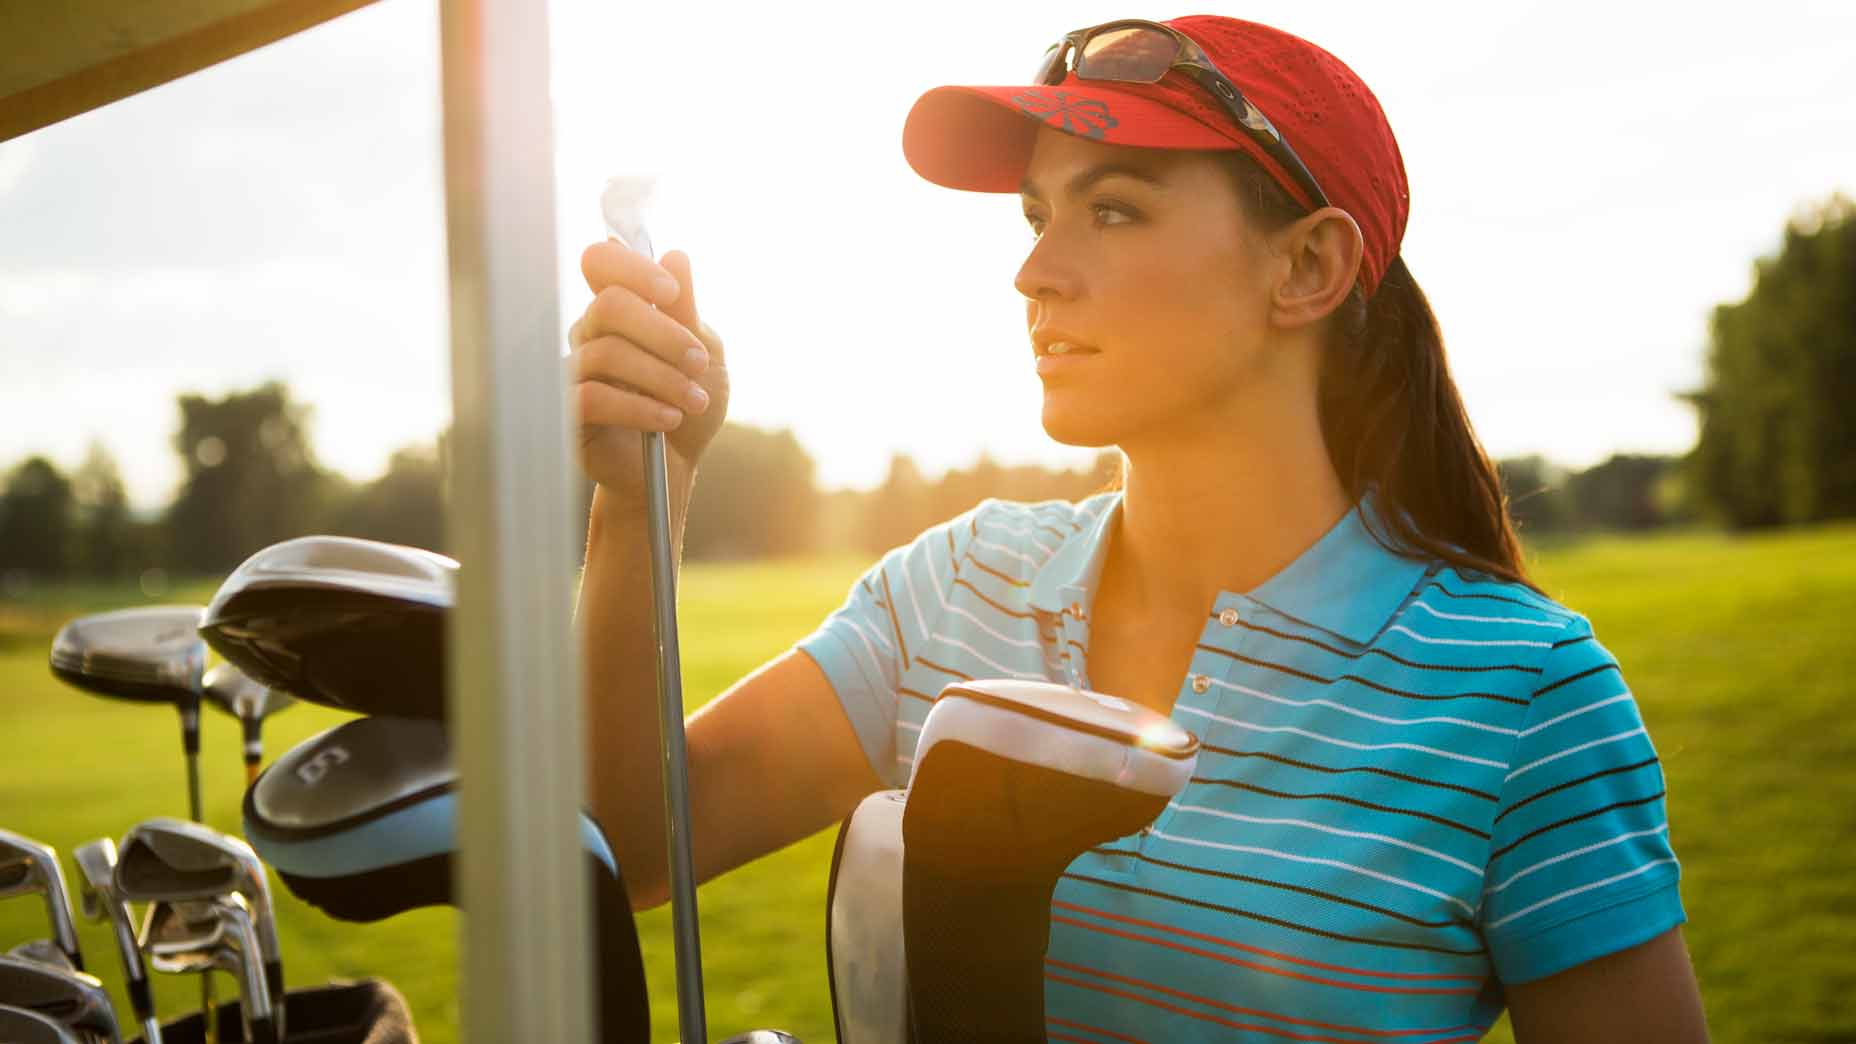 Women's golf tips: The 3 clubs every woman should have in her bag